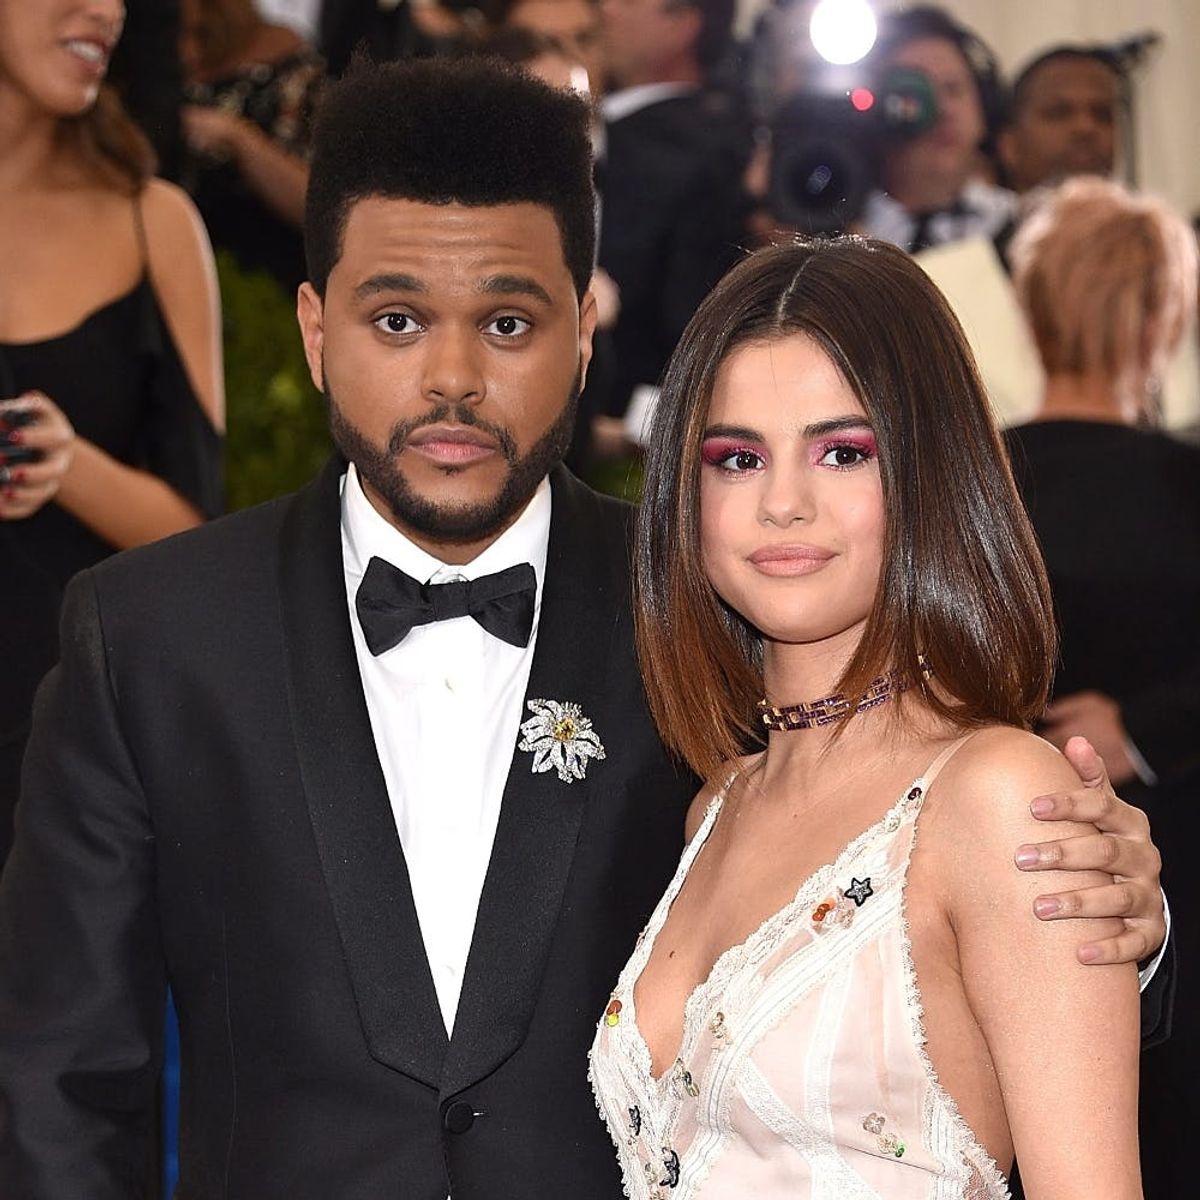 Selena Gomez and The Weeknd Bring the PDA to the Met Gala 2017 Red Carpet